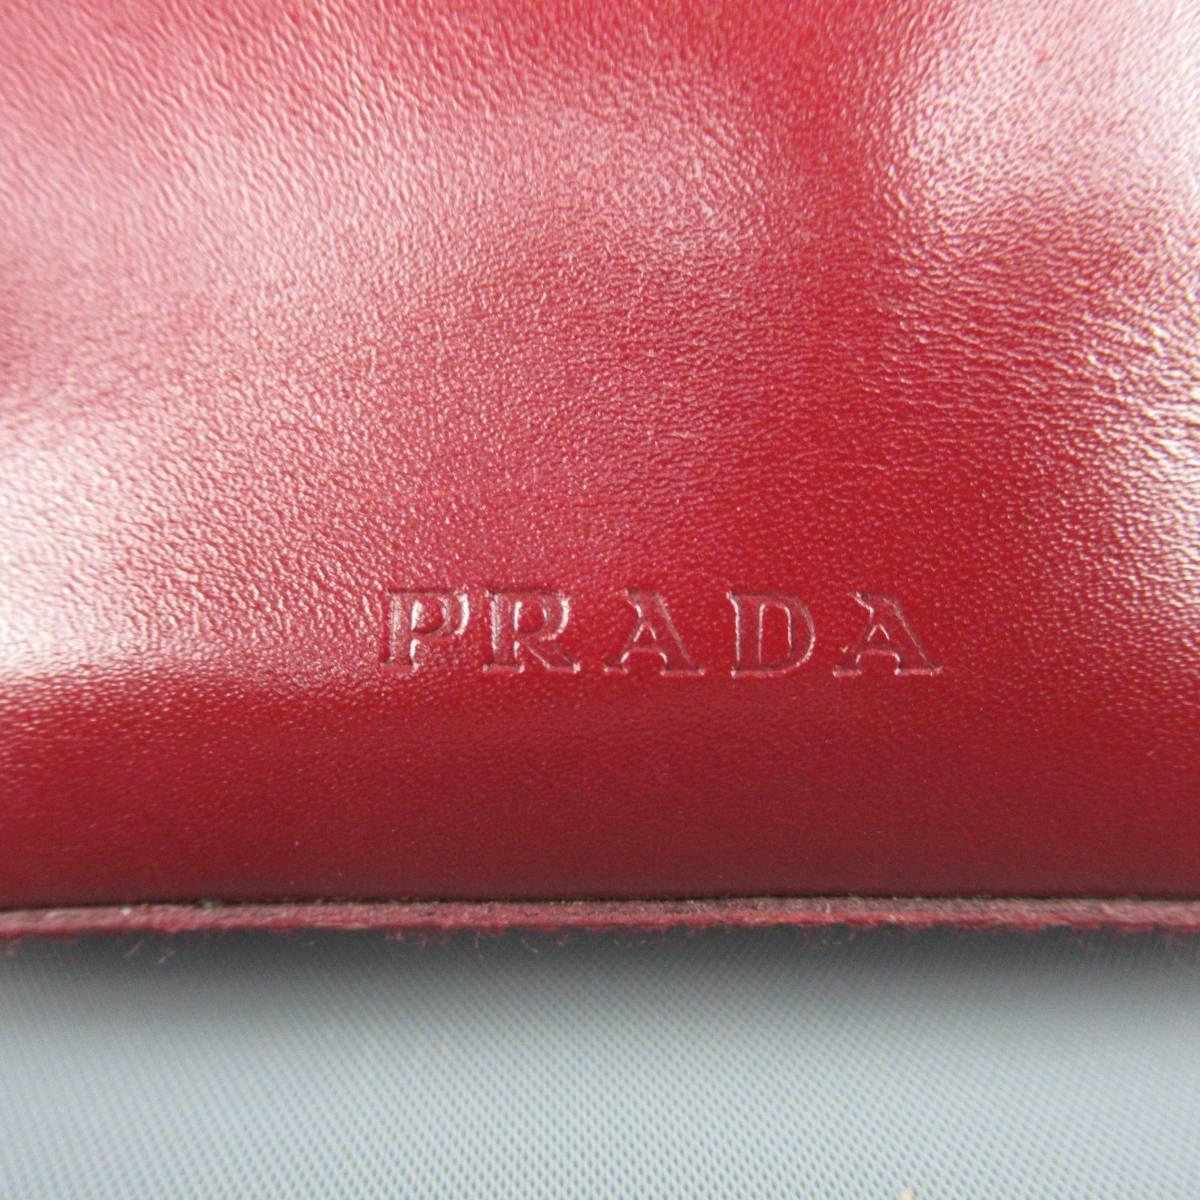 Retro style PRADA coin purse in burgundy leather with embossed logo at front and silver tone kiss lock top closure. Made in Italy.
 
Good Pre-Owned Condition.
 
Measurements:
 
Length: 5.5 in.
Width: 1 in.
Height: 3.25 in.


Web ID: 82667